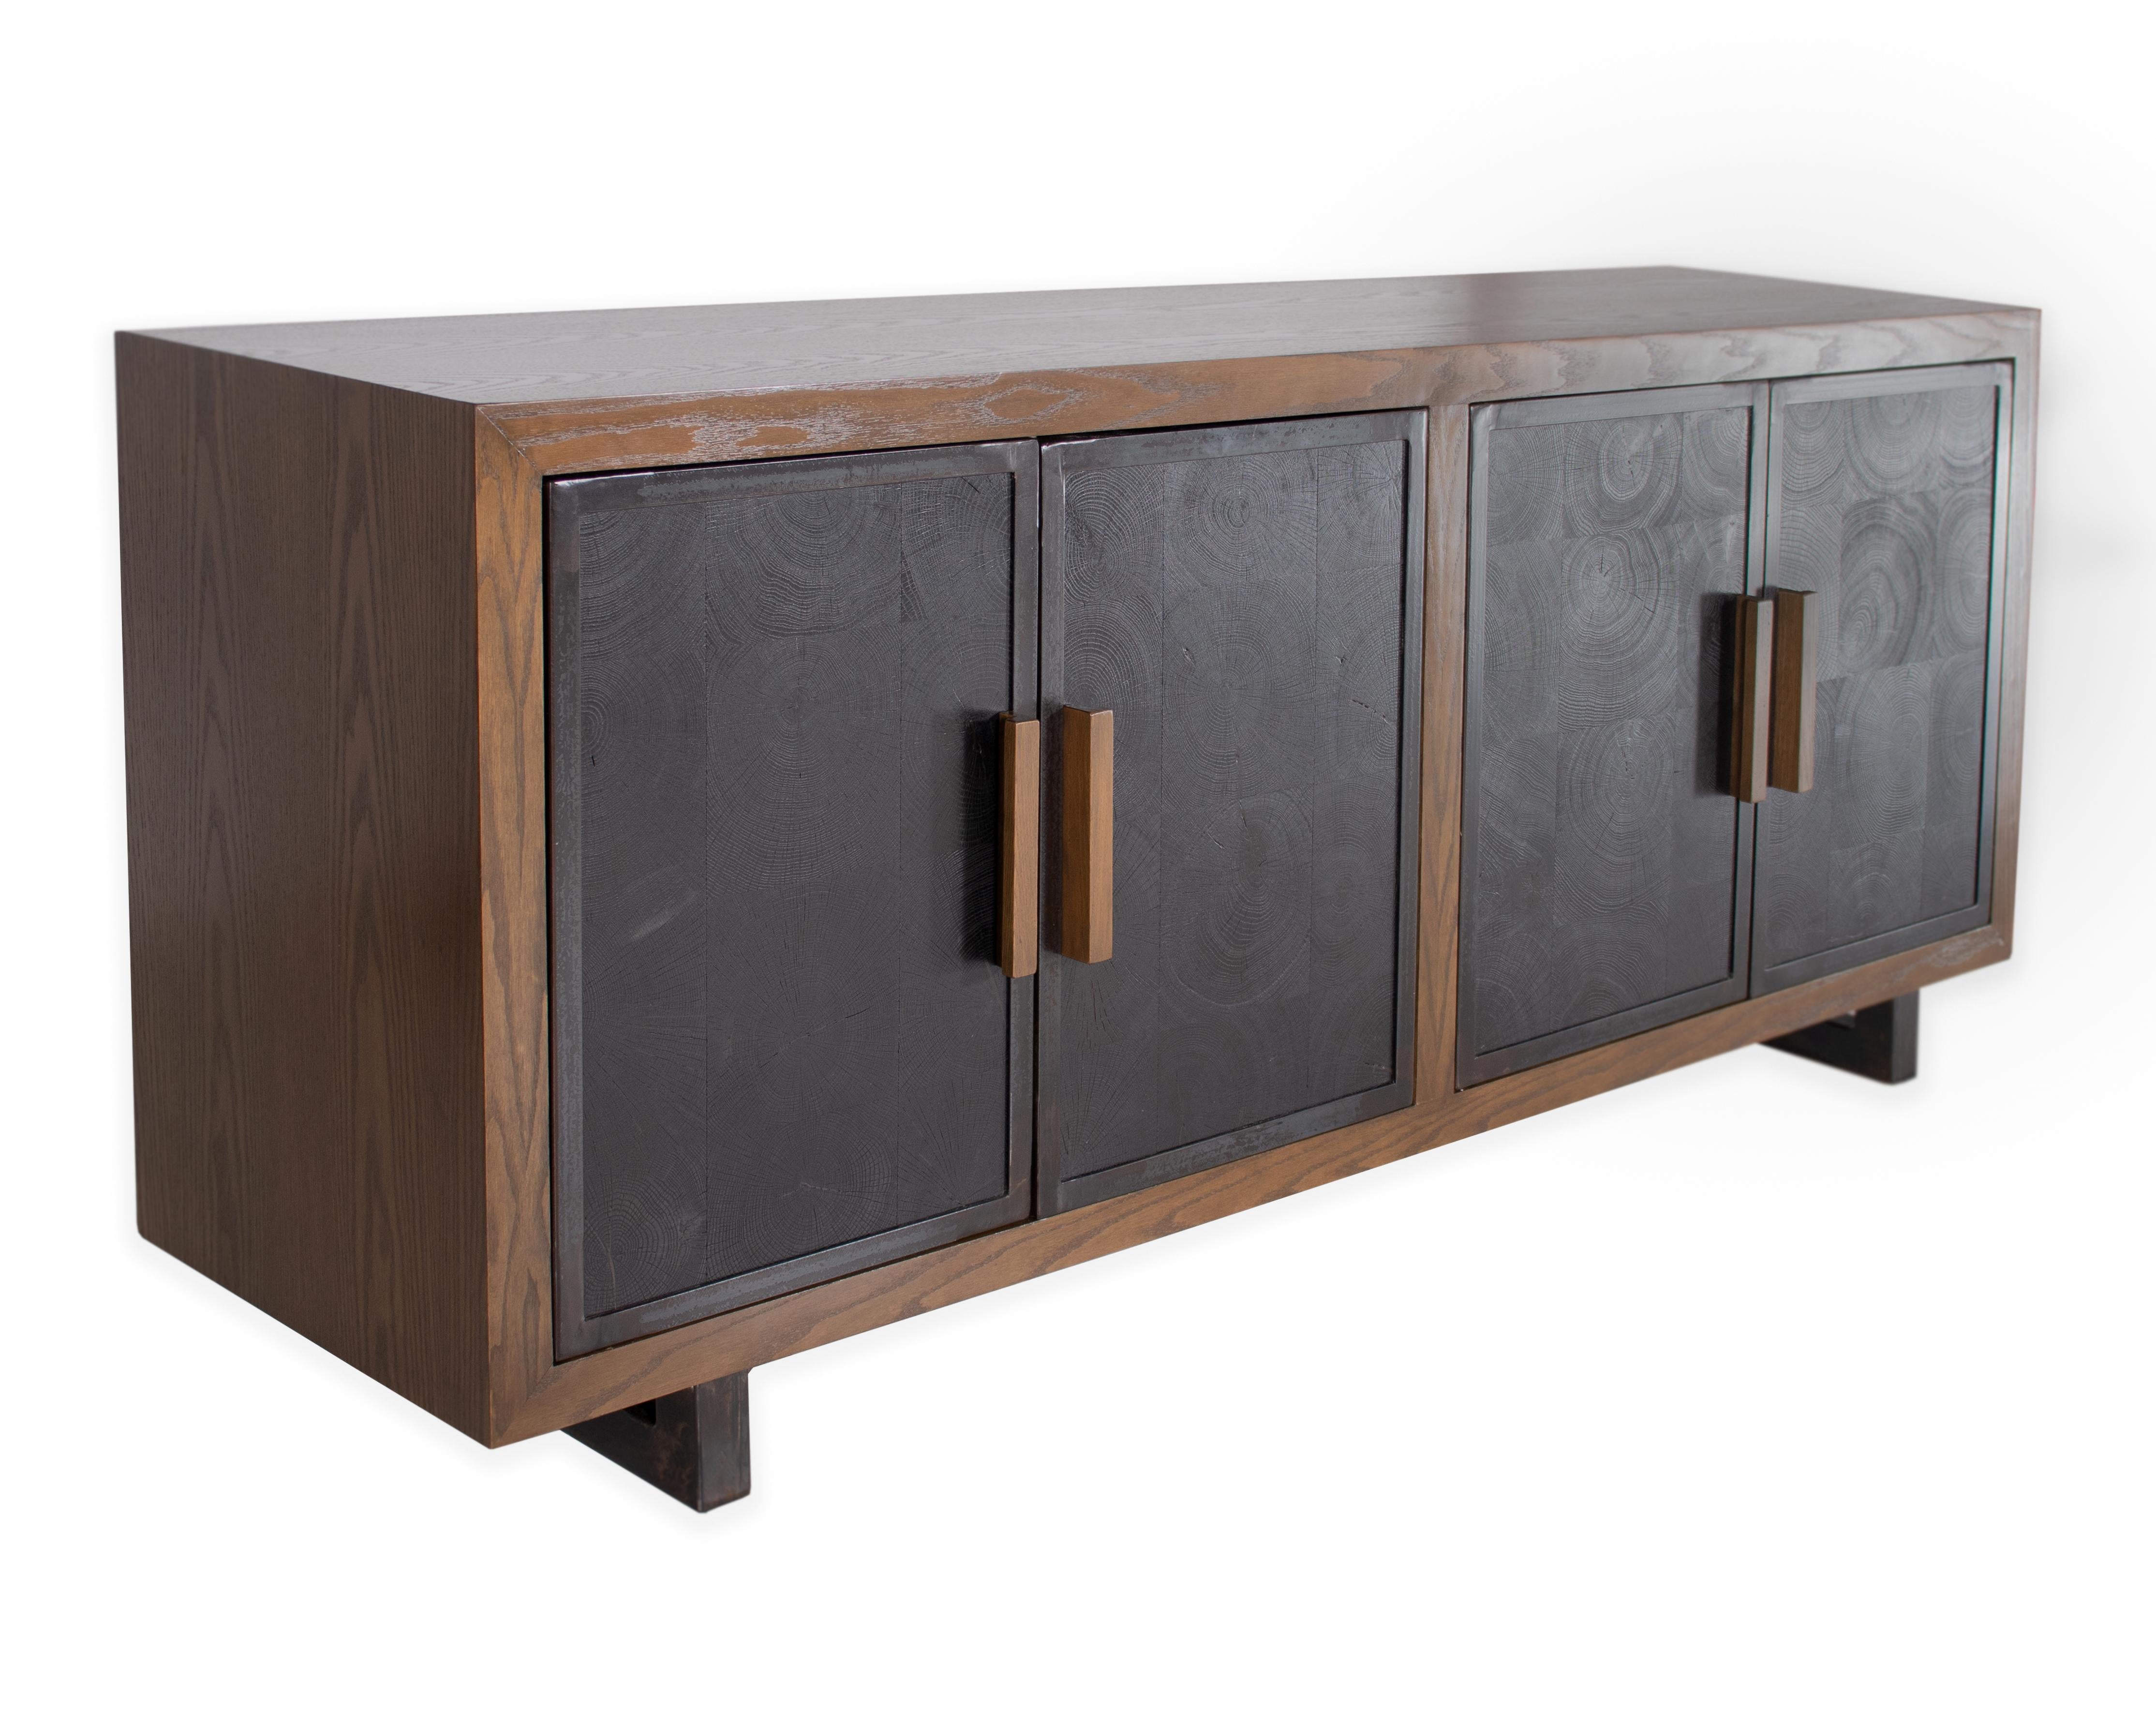 Four door server in oak with a bombay finish, demos ebonized oak doors, and ebony patina. 

Designed by Brendan Bass for the Vision and Design Collection, by using high quality materials and textures. All materials are sourced from local vendors